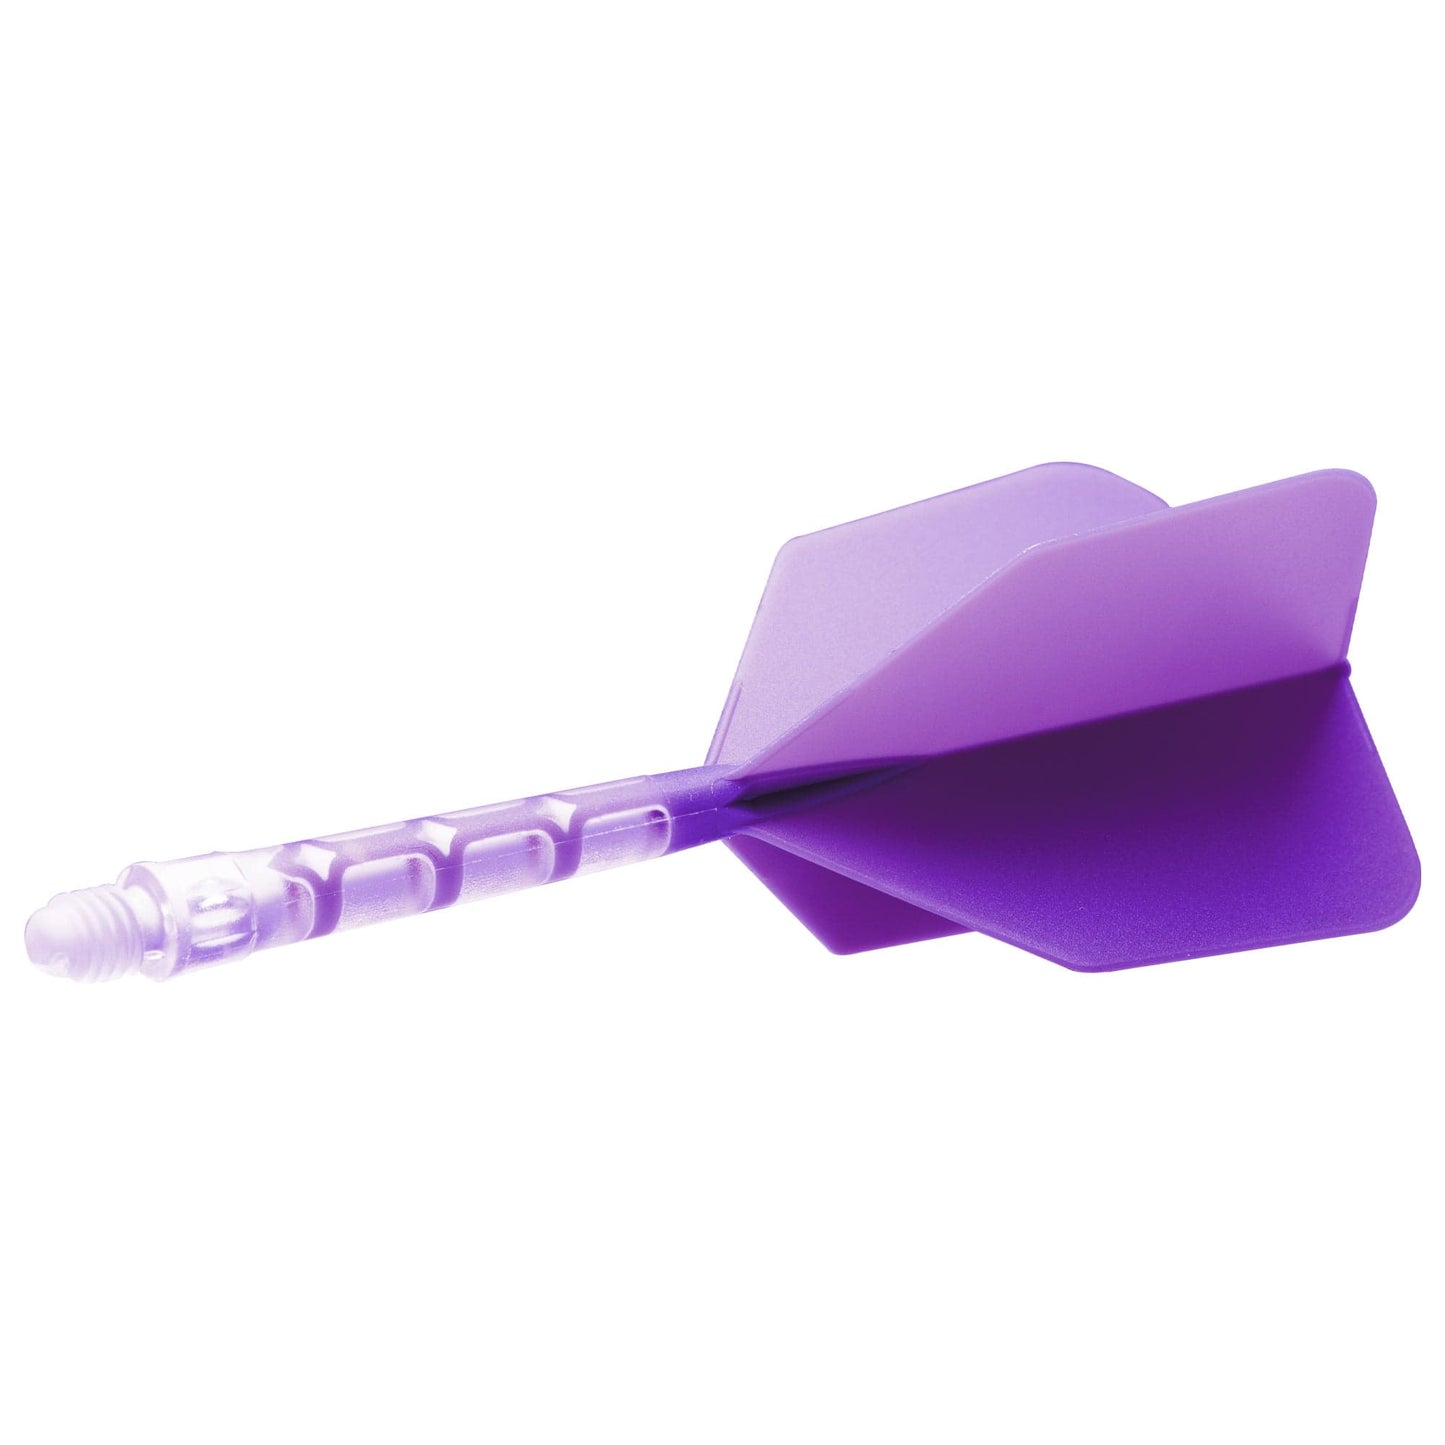 Cuesoul Rost T19 Integrated Dart Shaft and Flights - Big Wing - Clear with Purple Flight